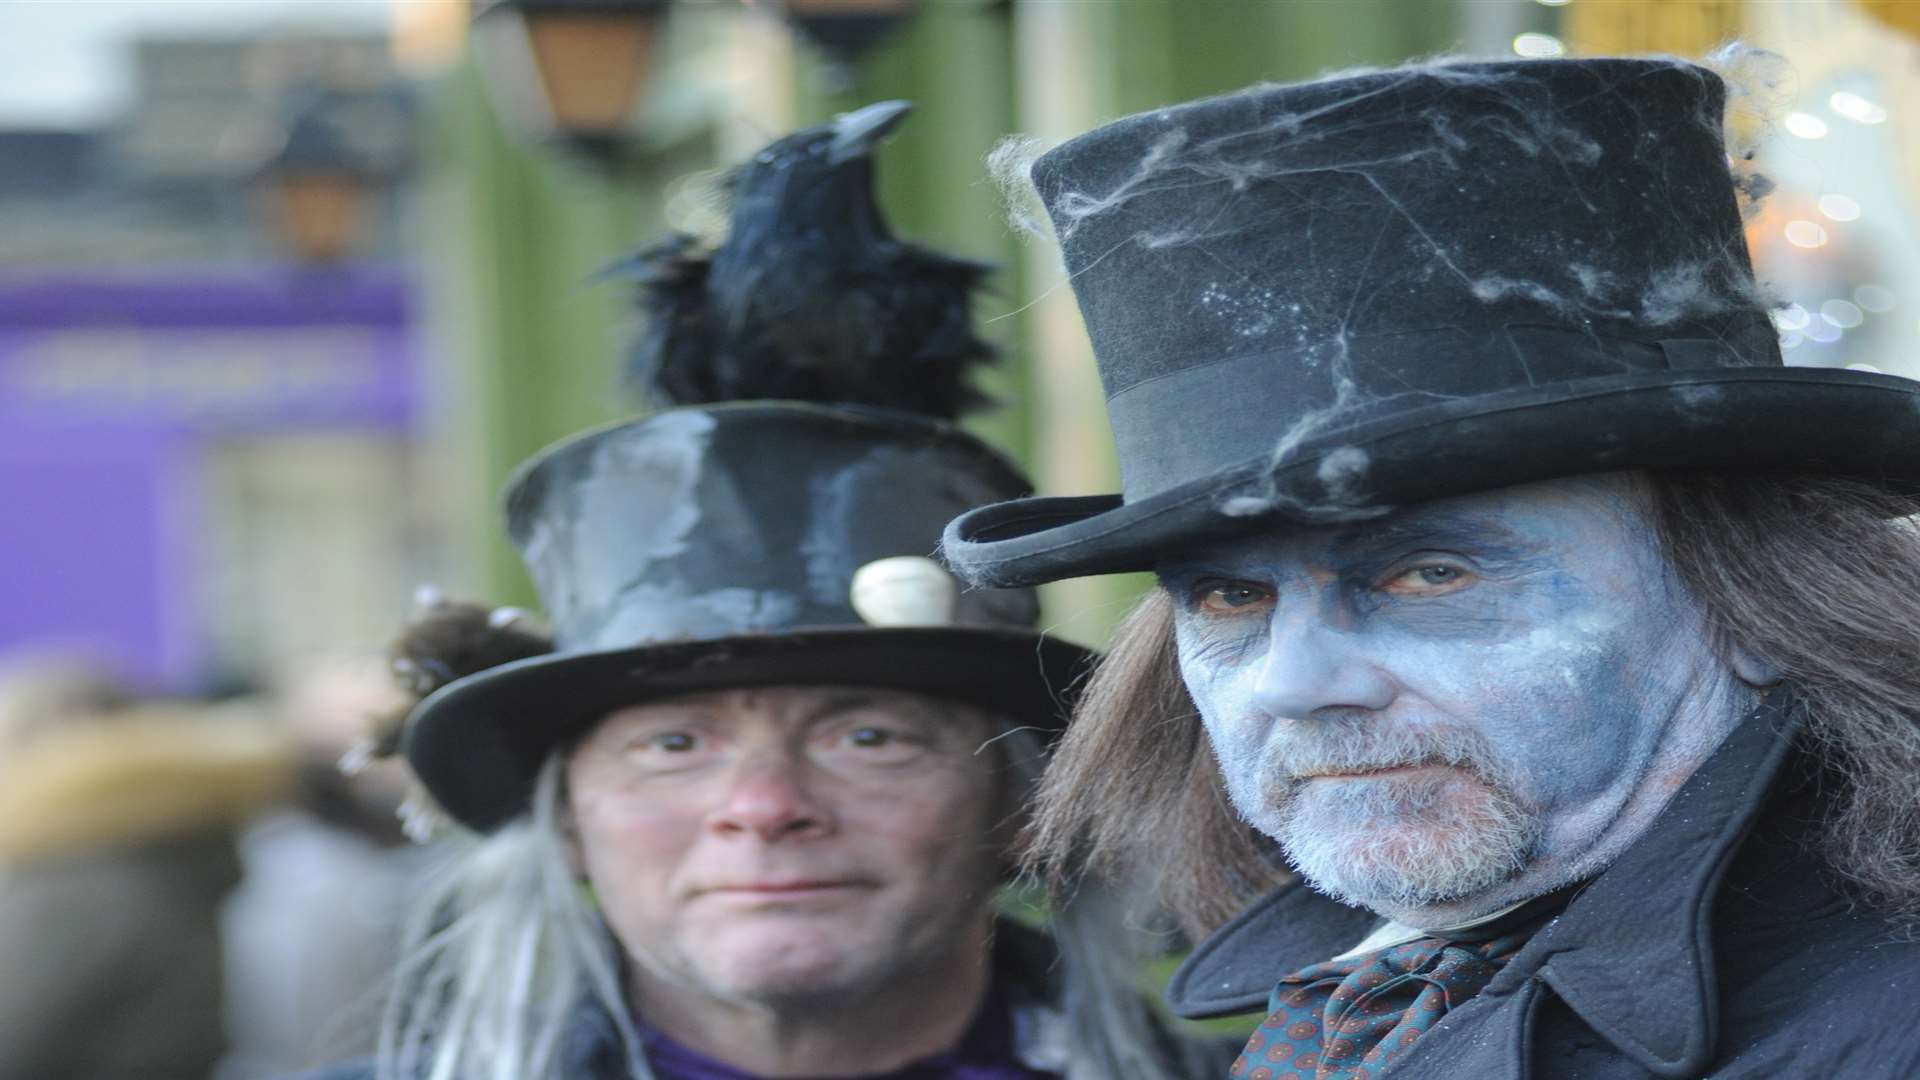 There will be parades and characters at the Dickensian Christmas Festival